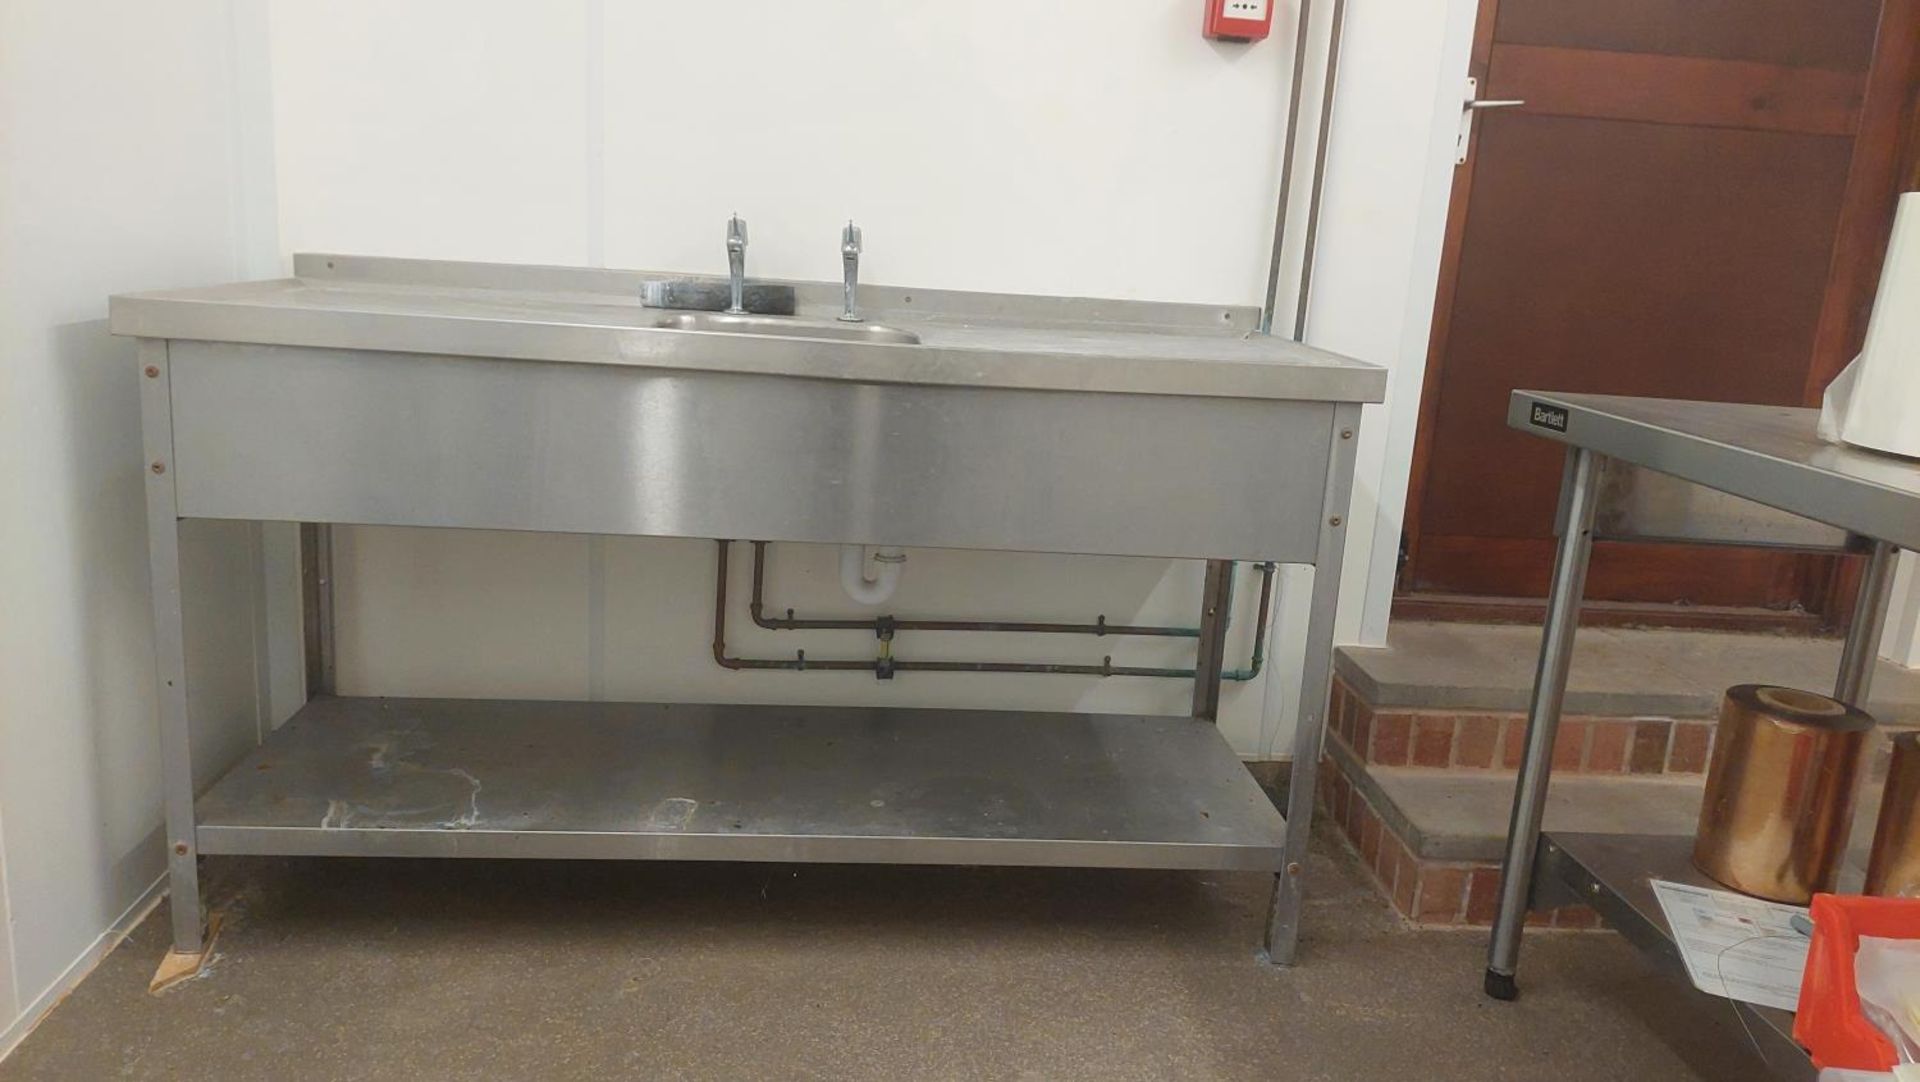 Stainless steel sink c/w double drainers 160cm x 60cm